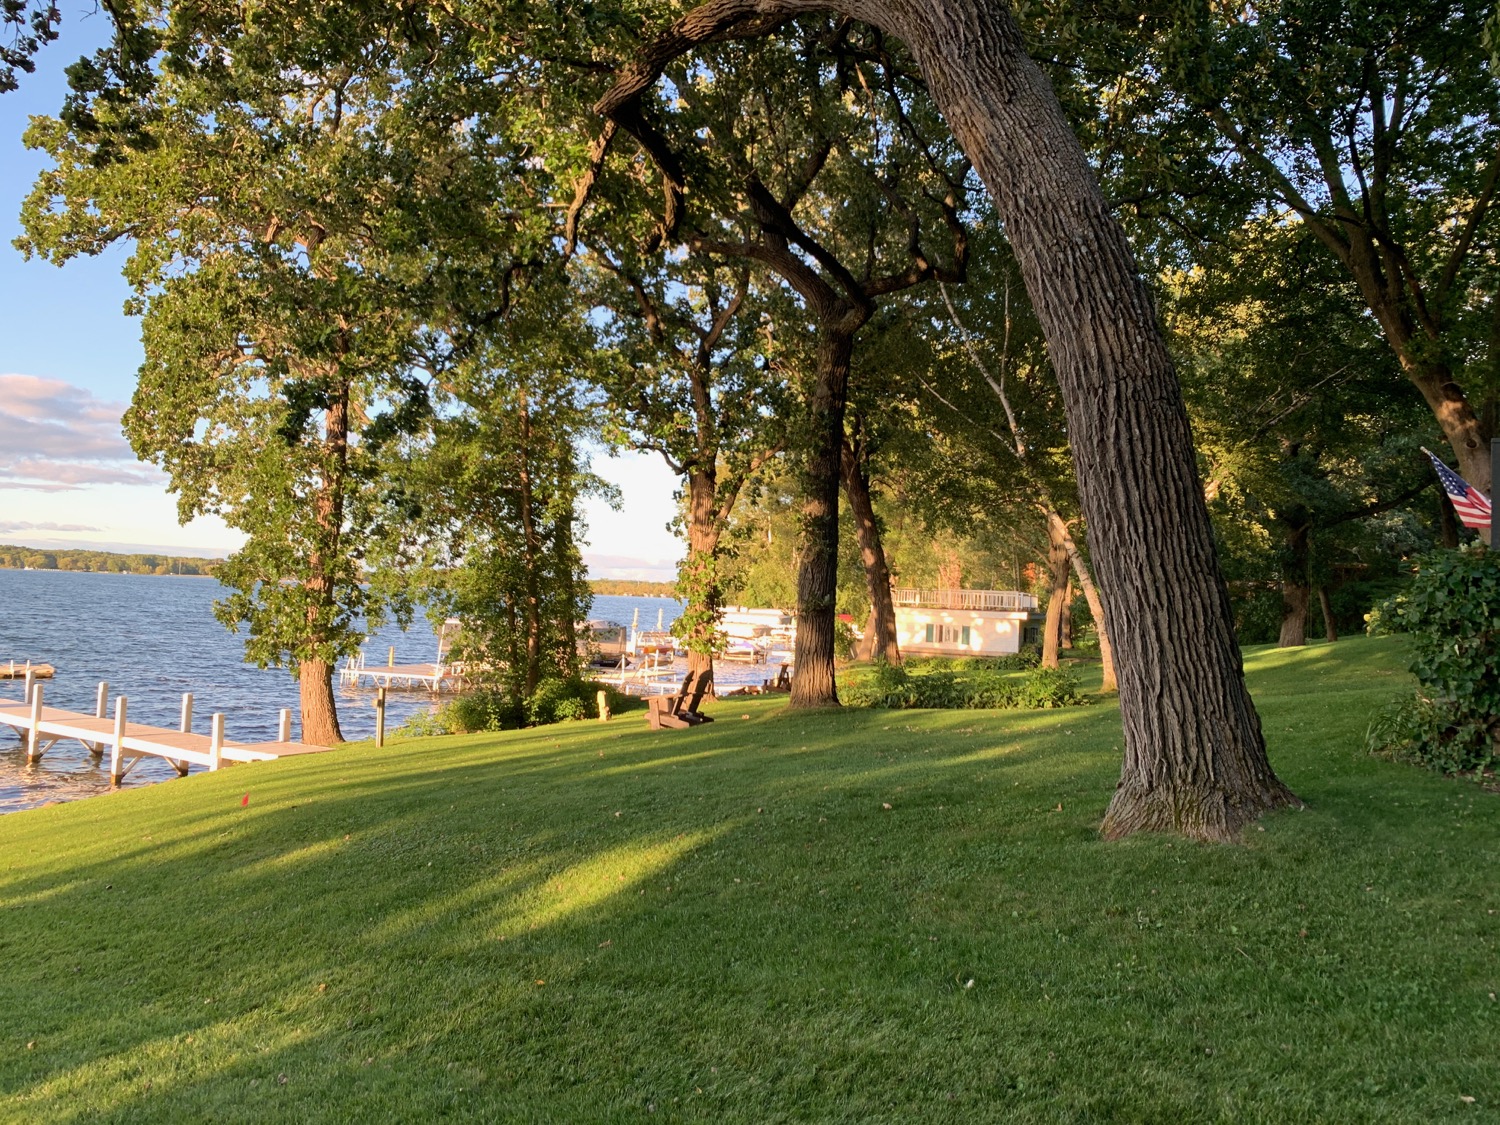 a grass field with trees and a dock in the background